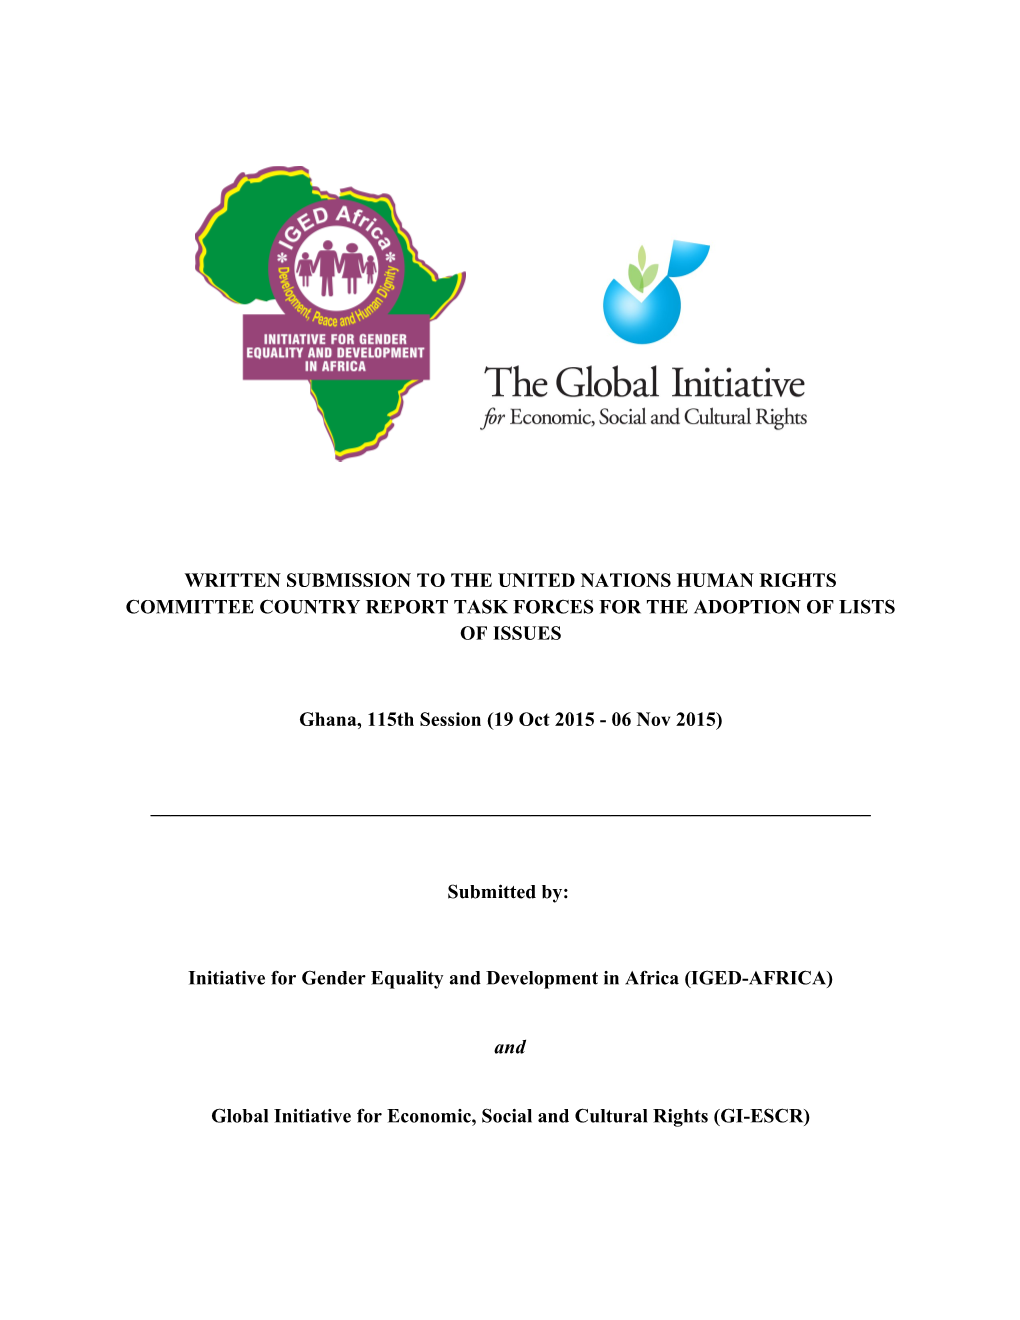 Initiative for Gender Equality and Development in Africa(IGED-AFRICA)